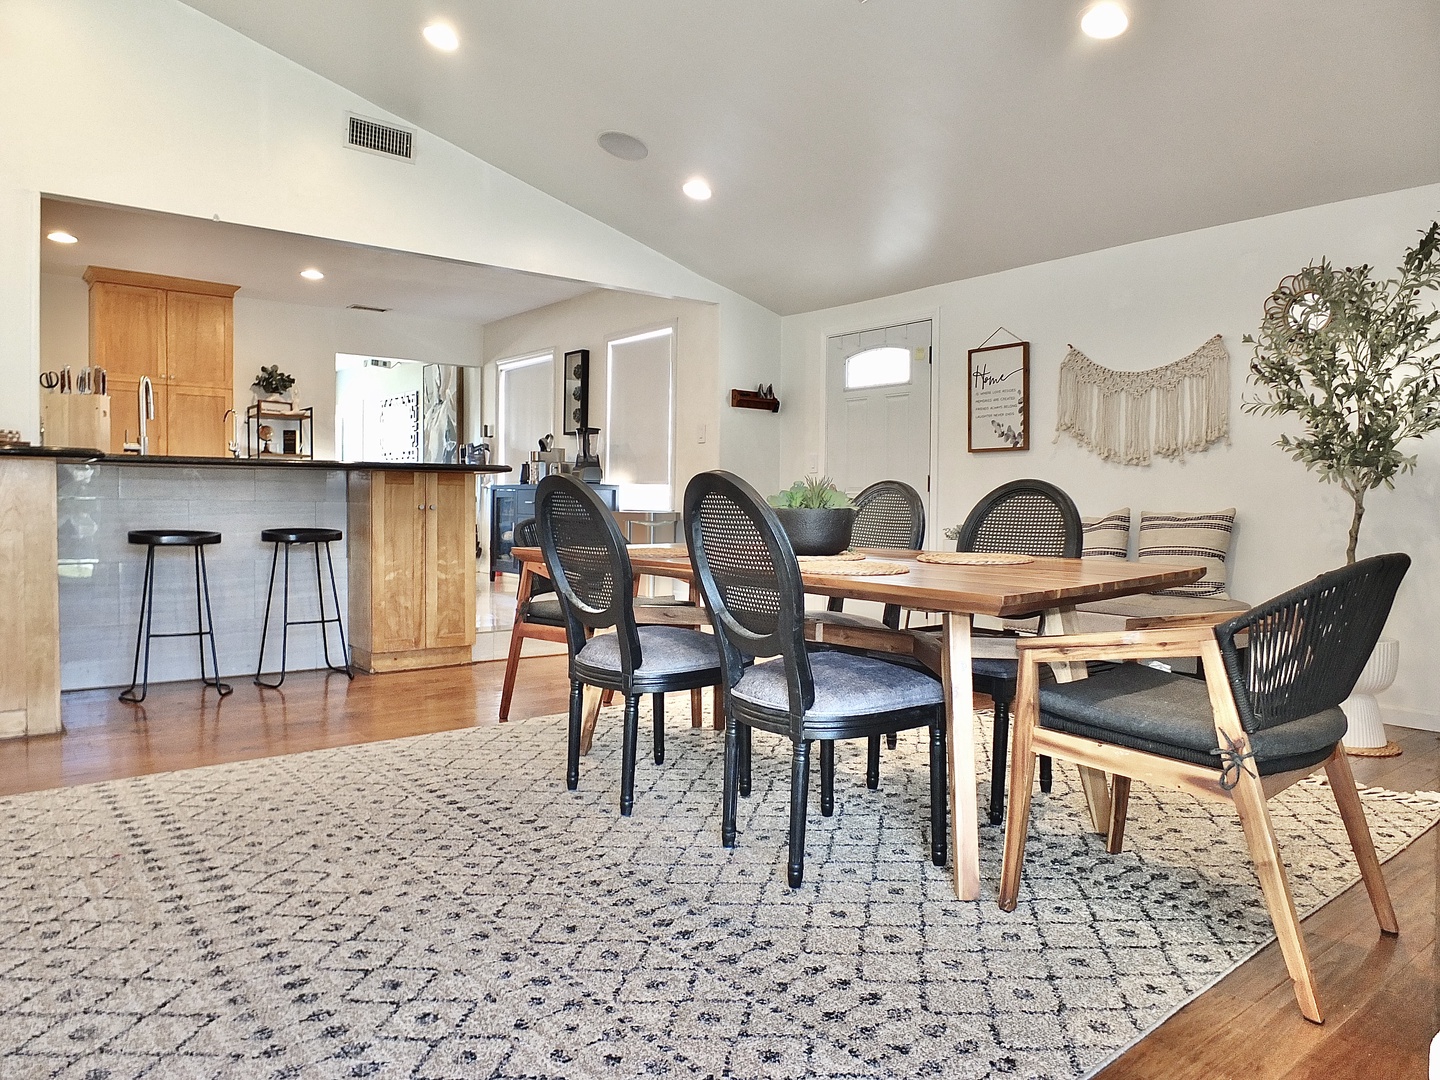 Gather family around the dining table, with seating for 6